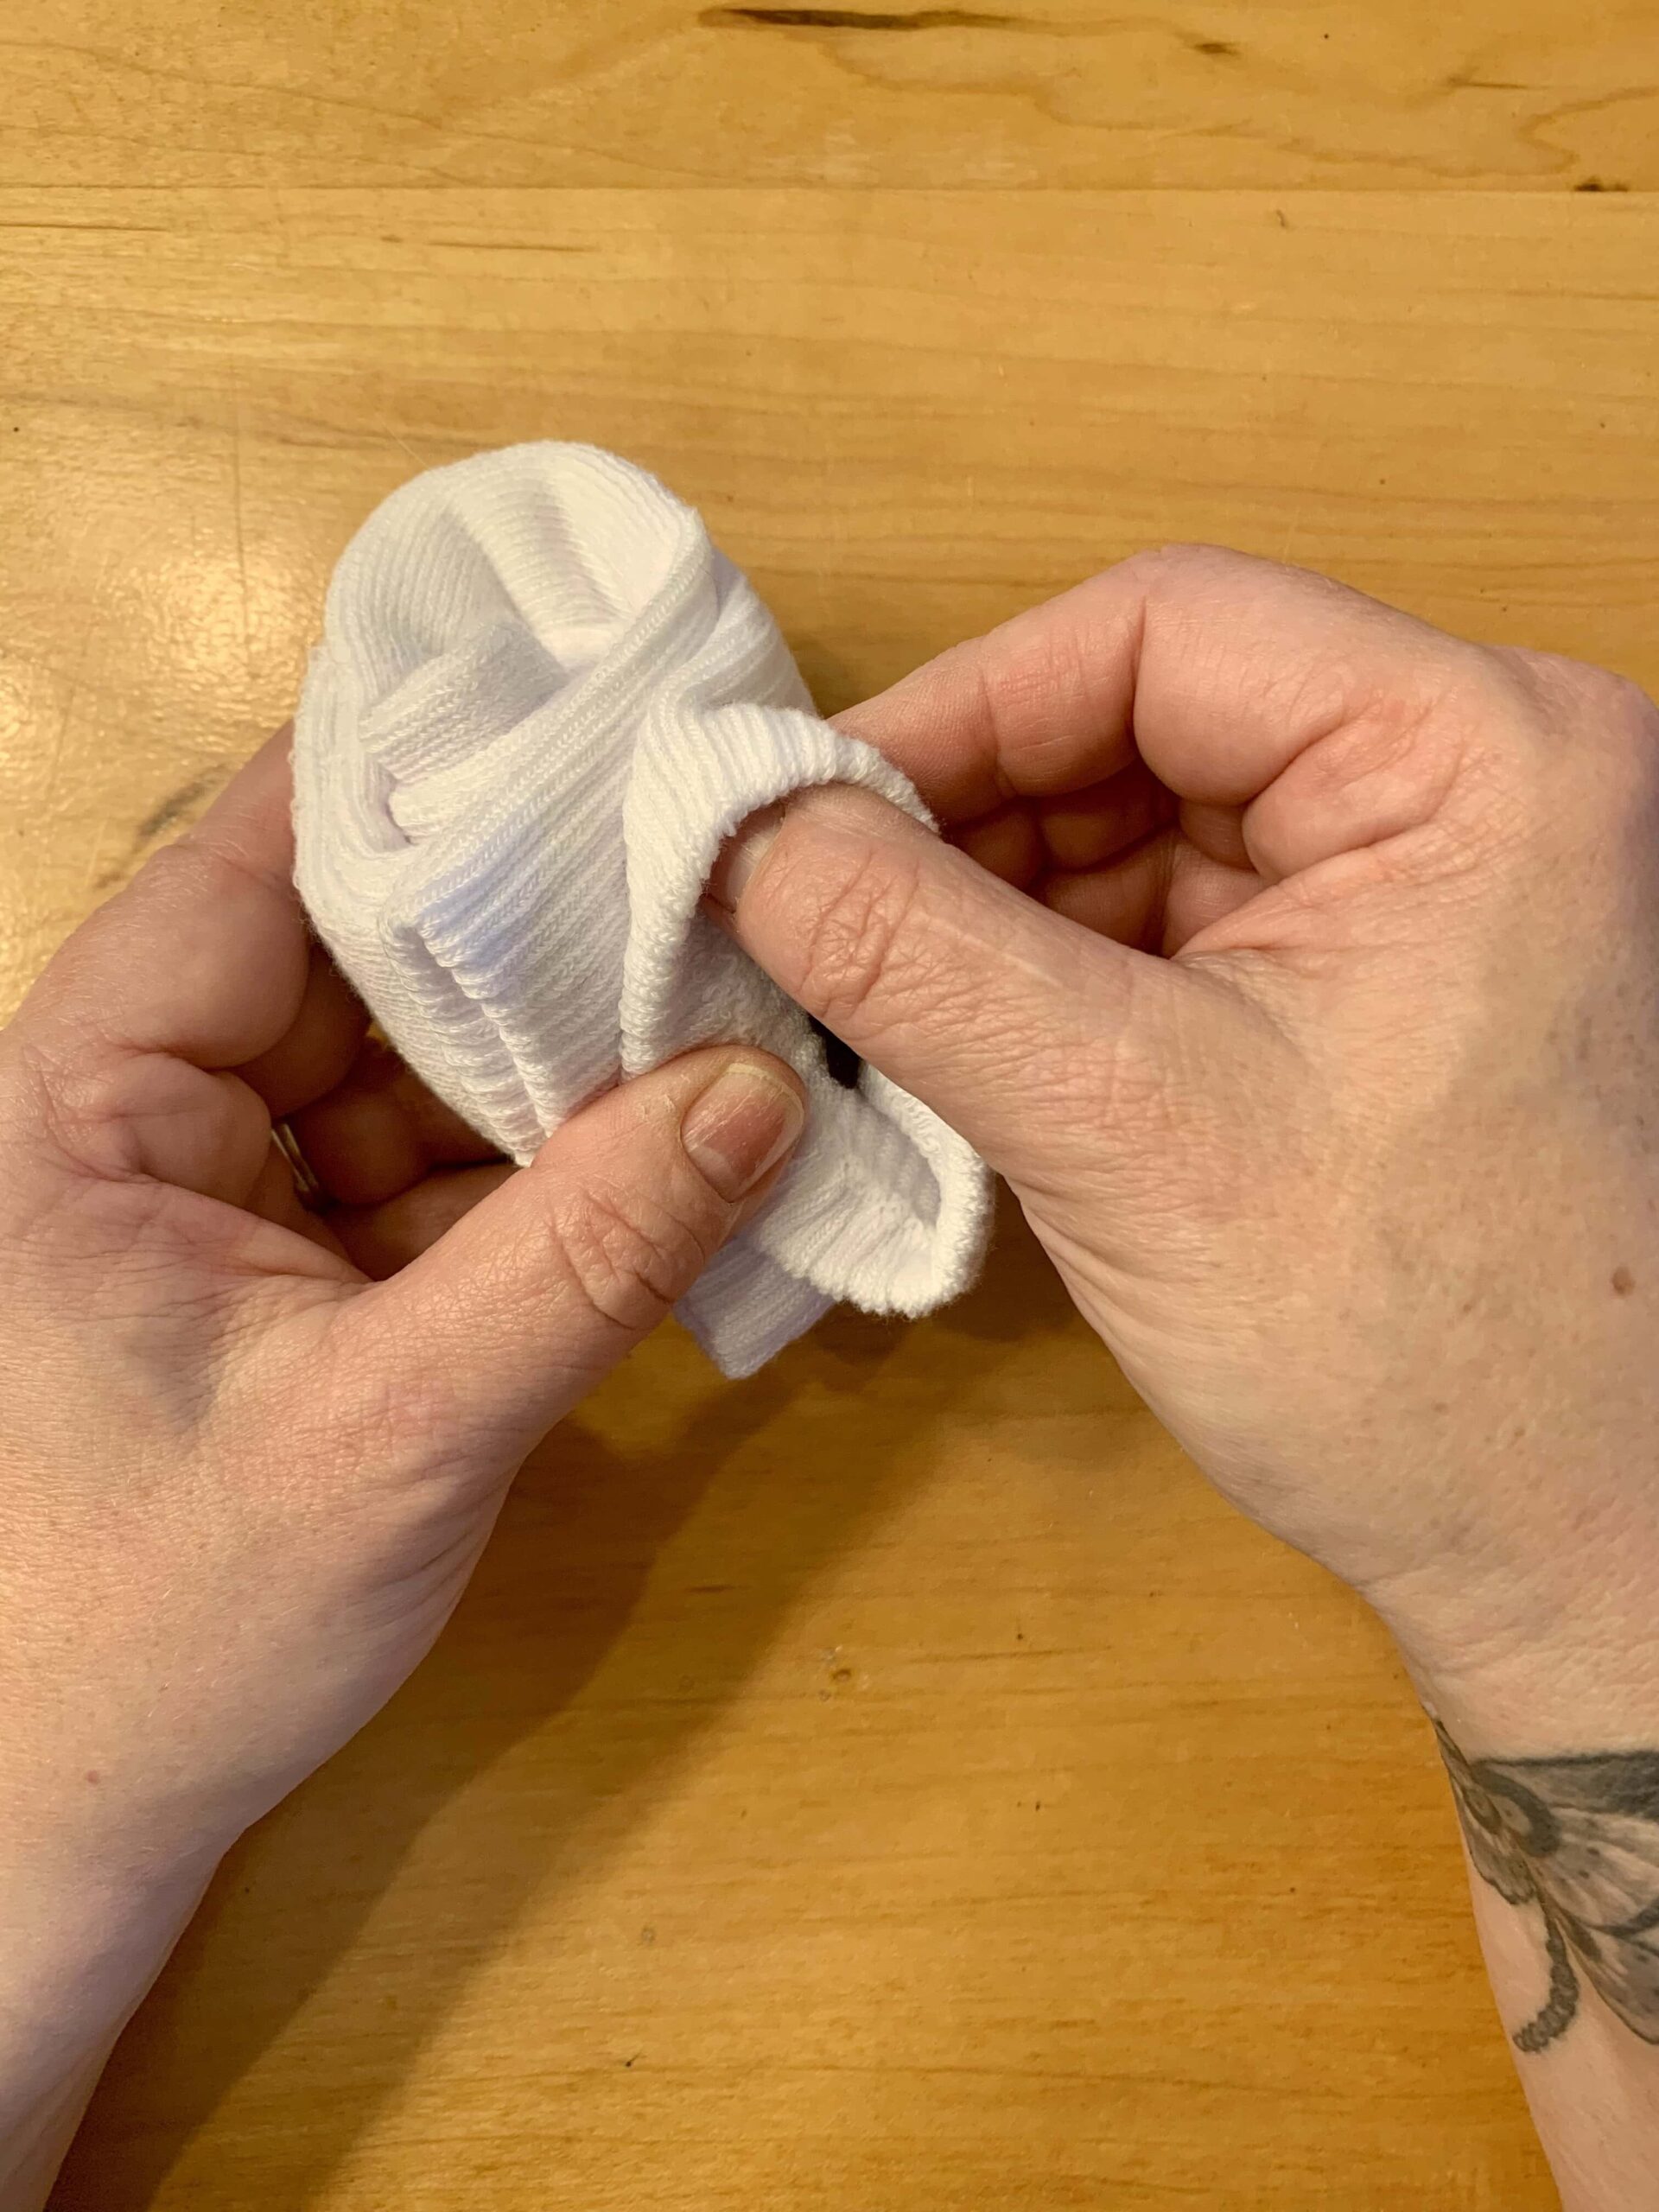 How to fold socks military style